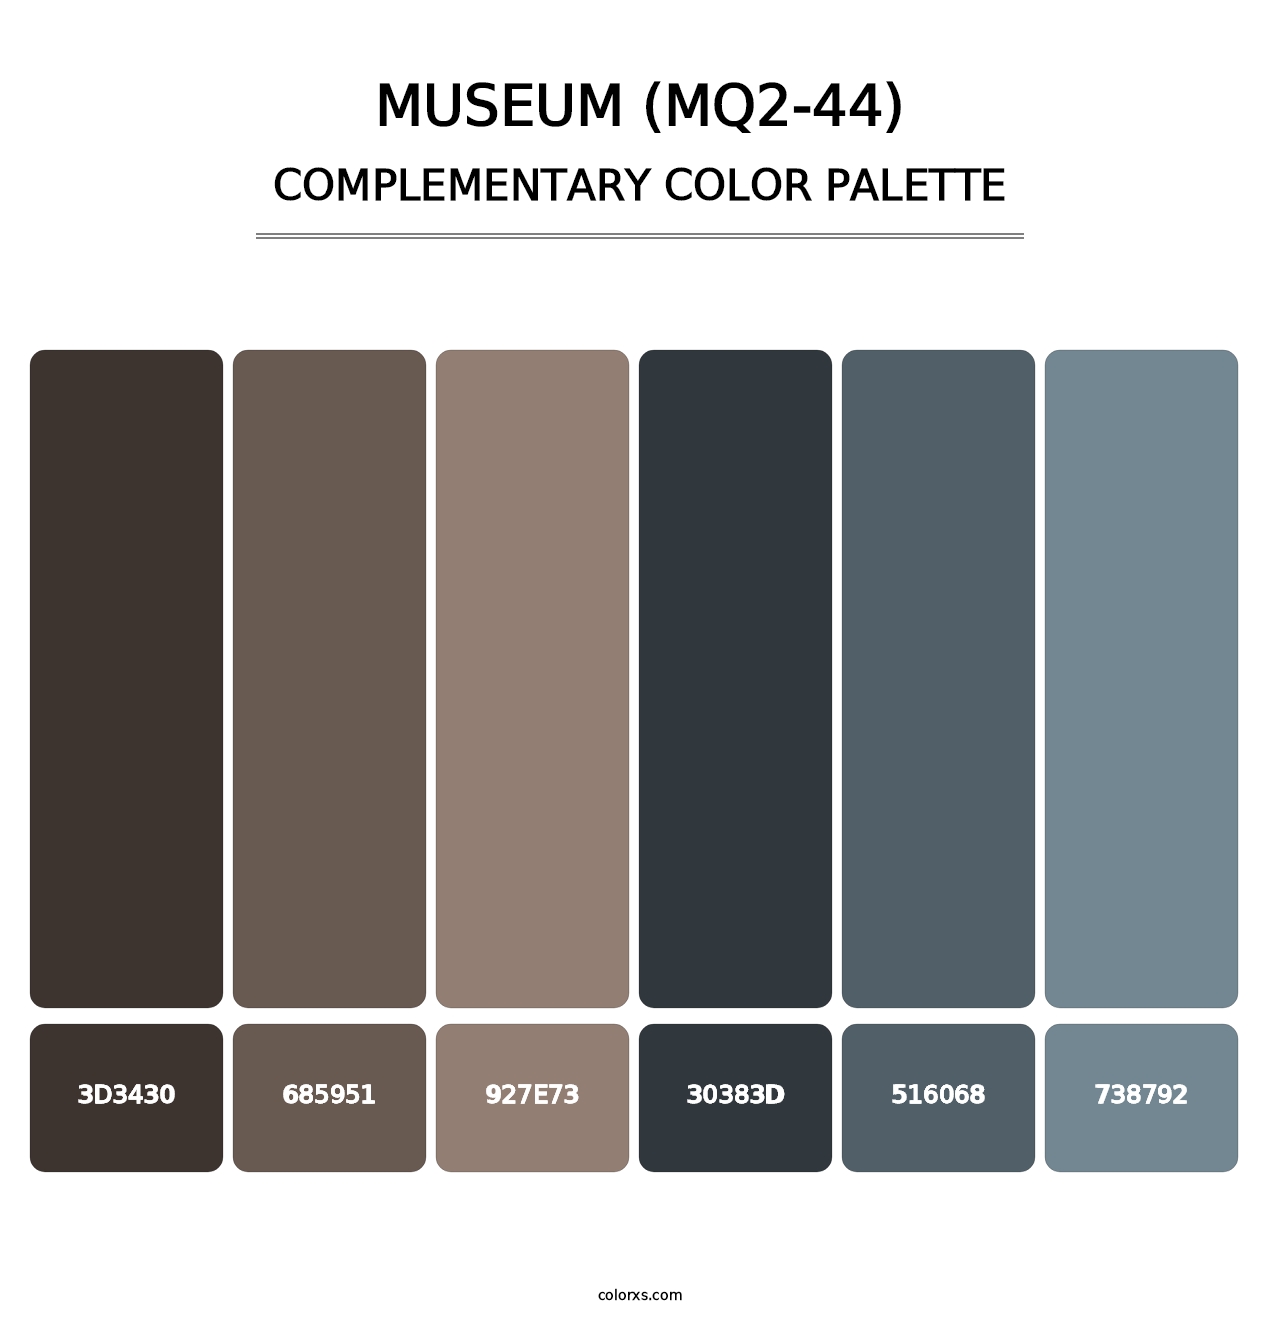 Museum (MQ2-44) - Complementary Color Palette